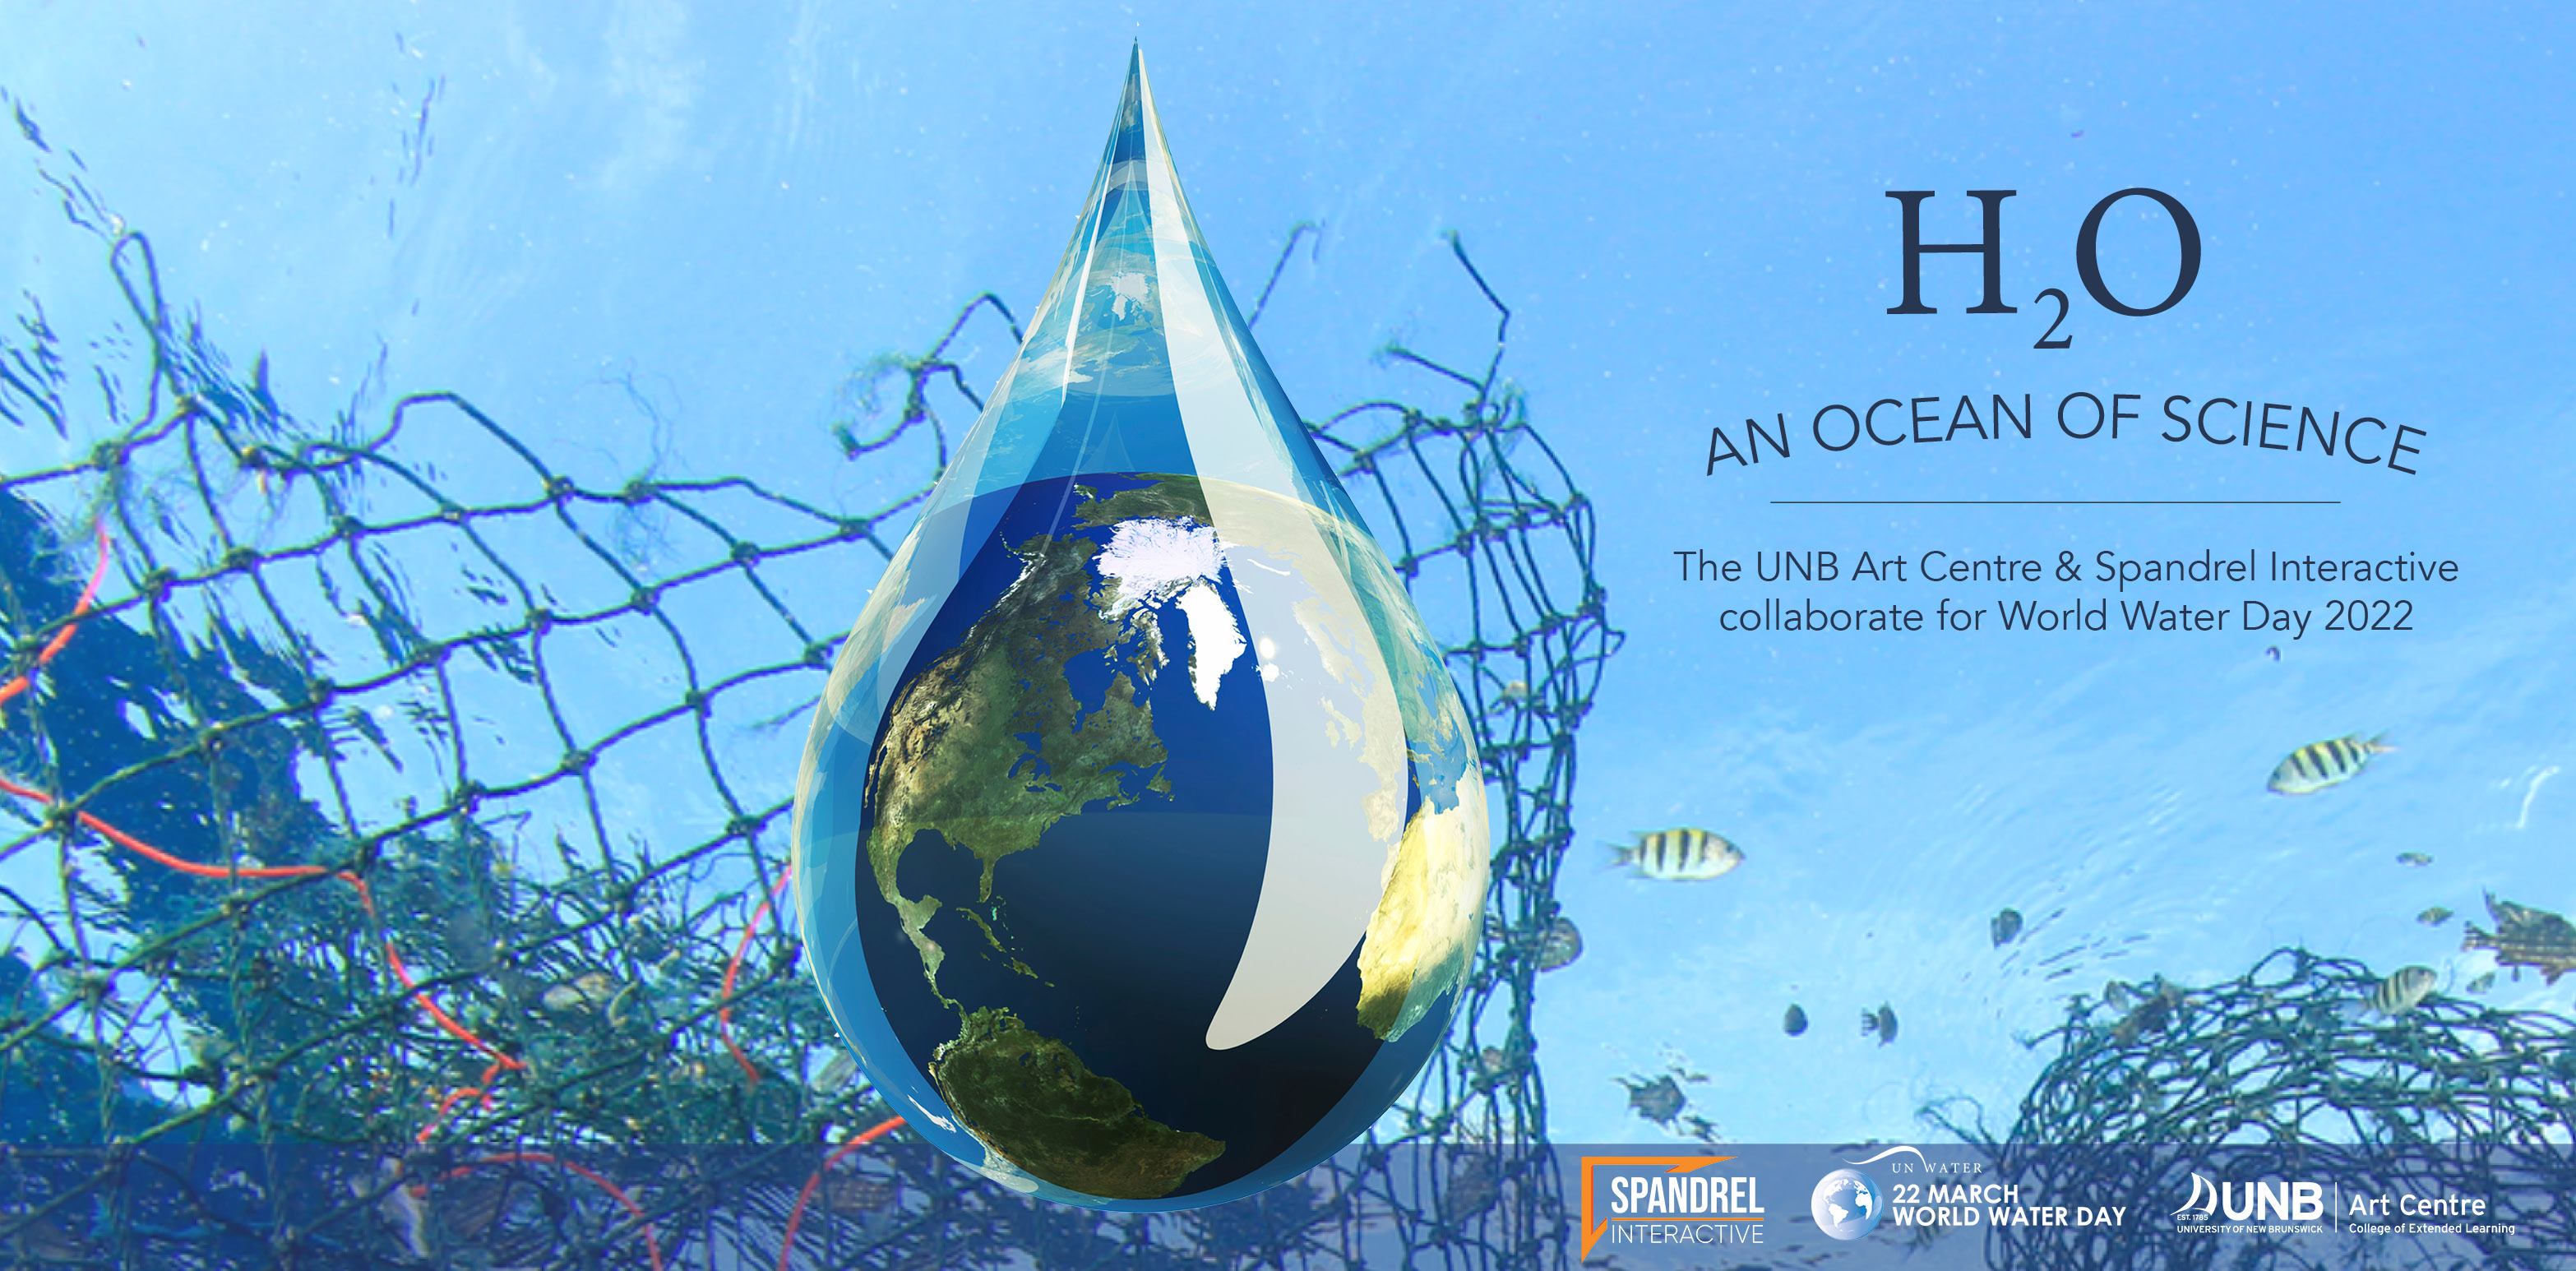 poster promoting the world water day app: H2O and Ocean of Science 2022